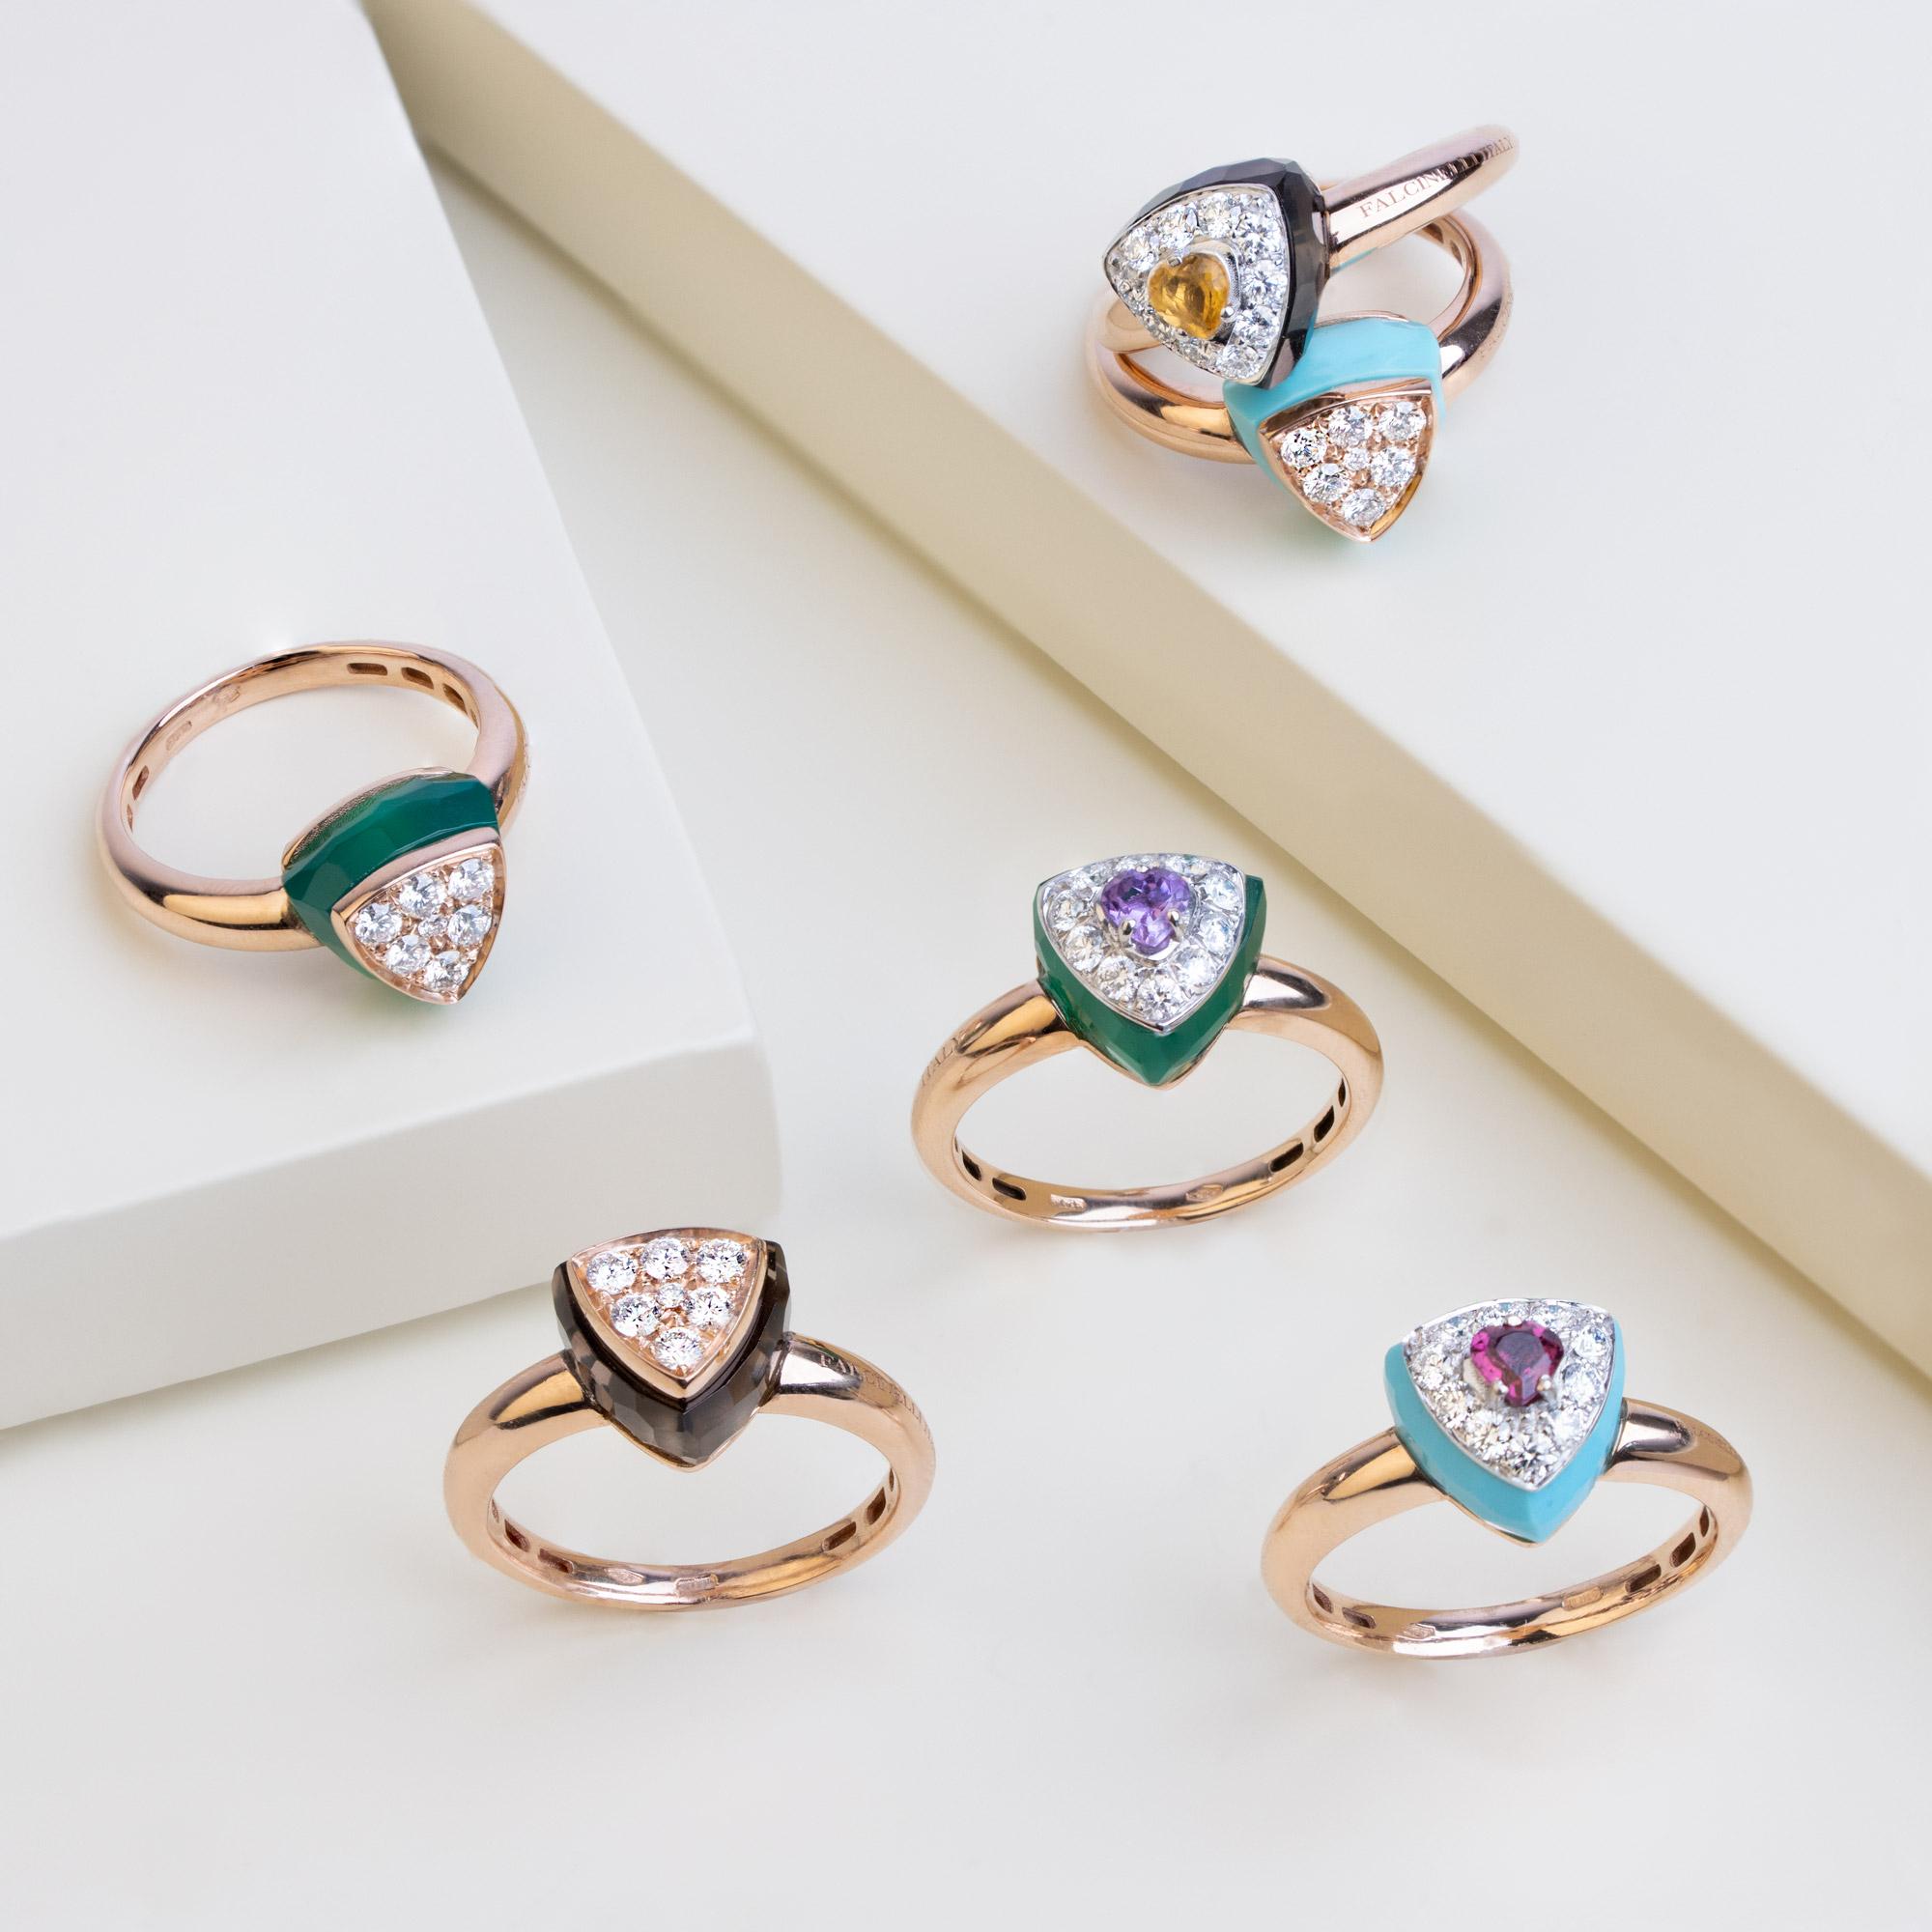 For Sale:  Les Petits Bonbons Ring Triangle with Rhodolite, Turquoise and Diamonds 3